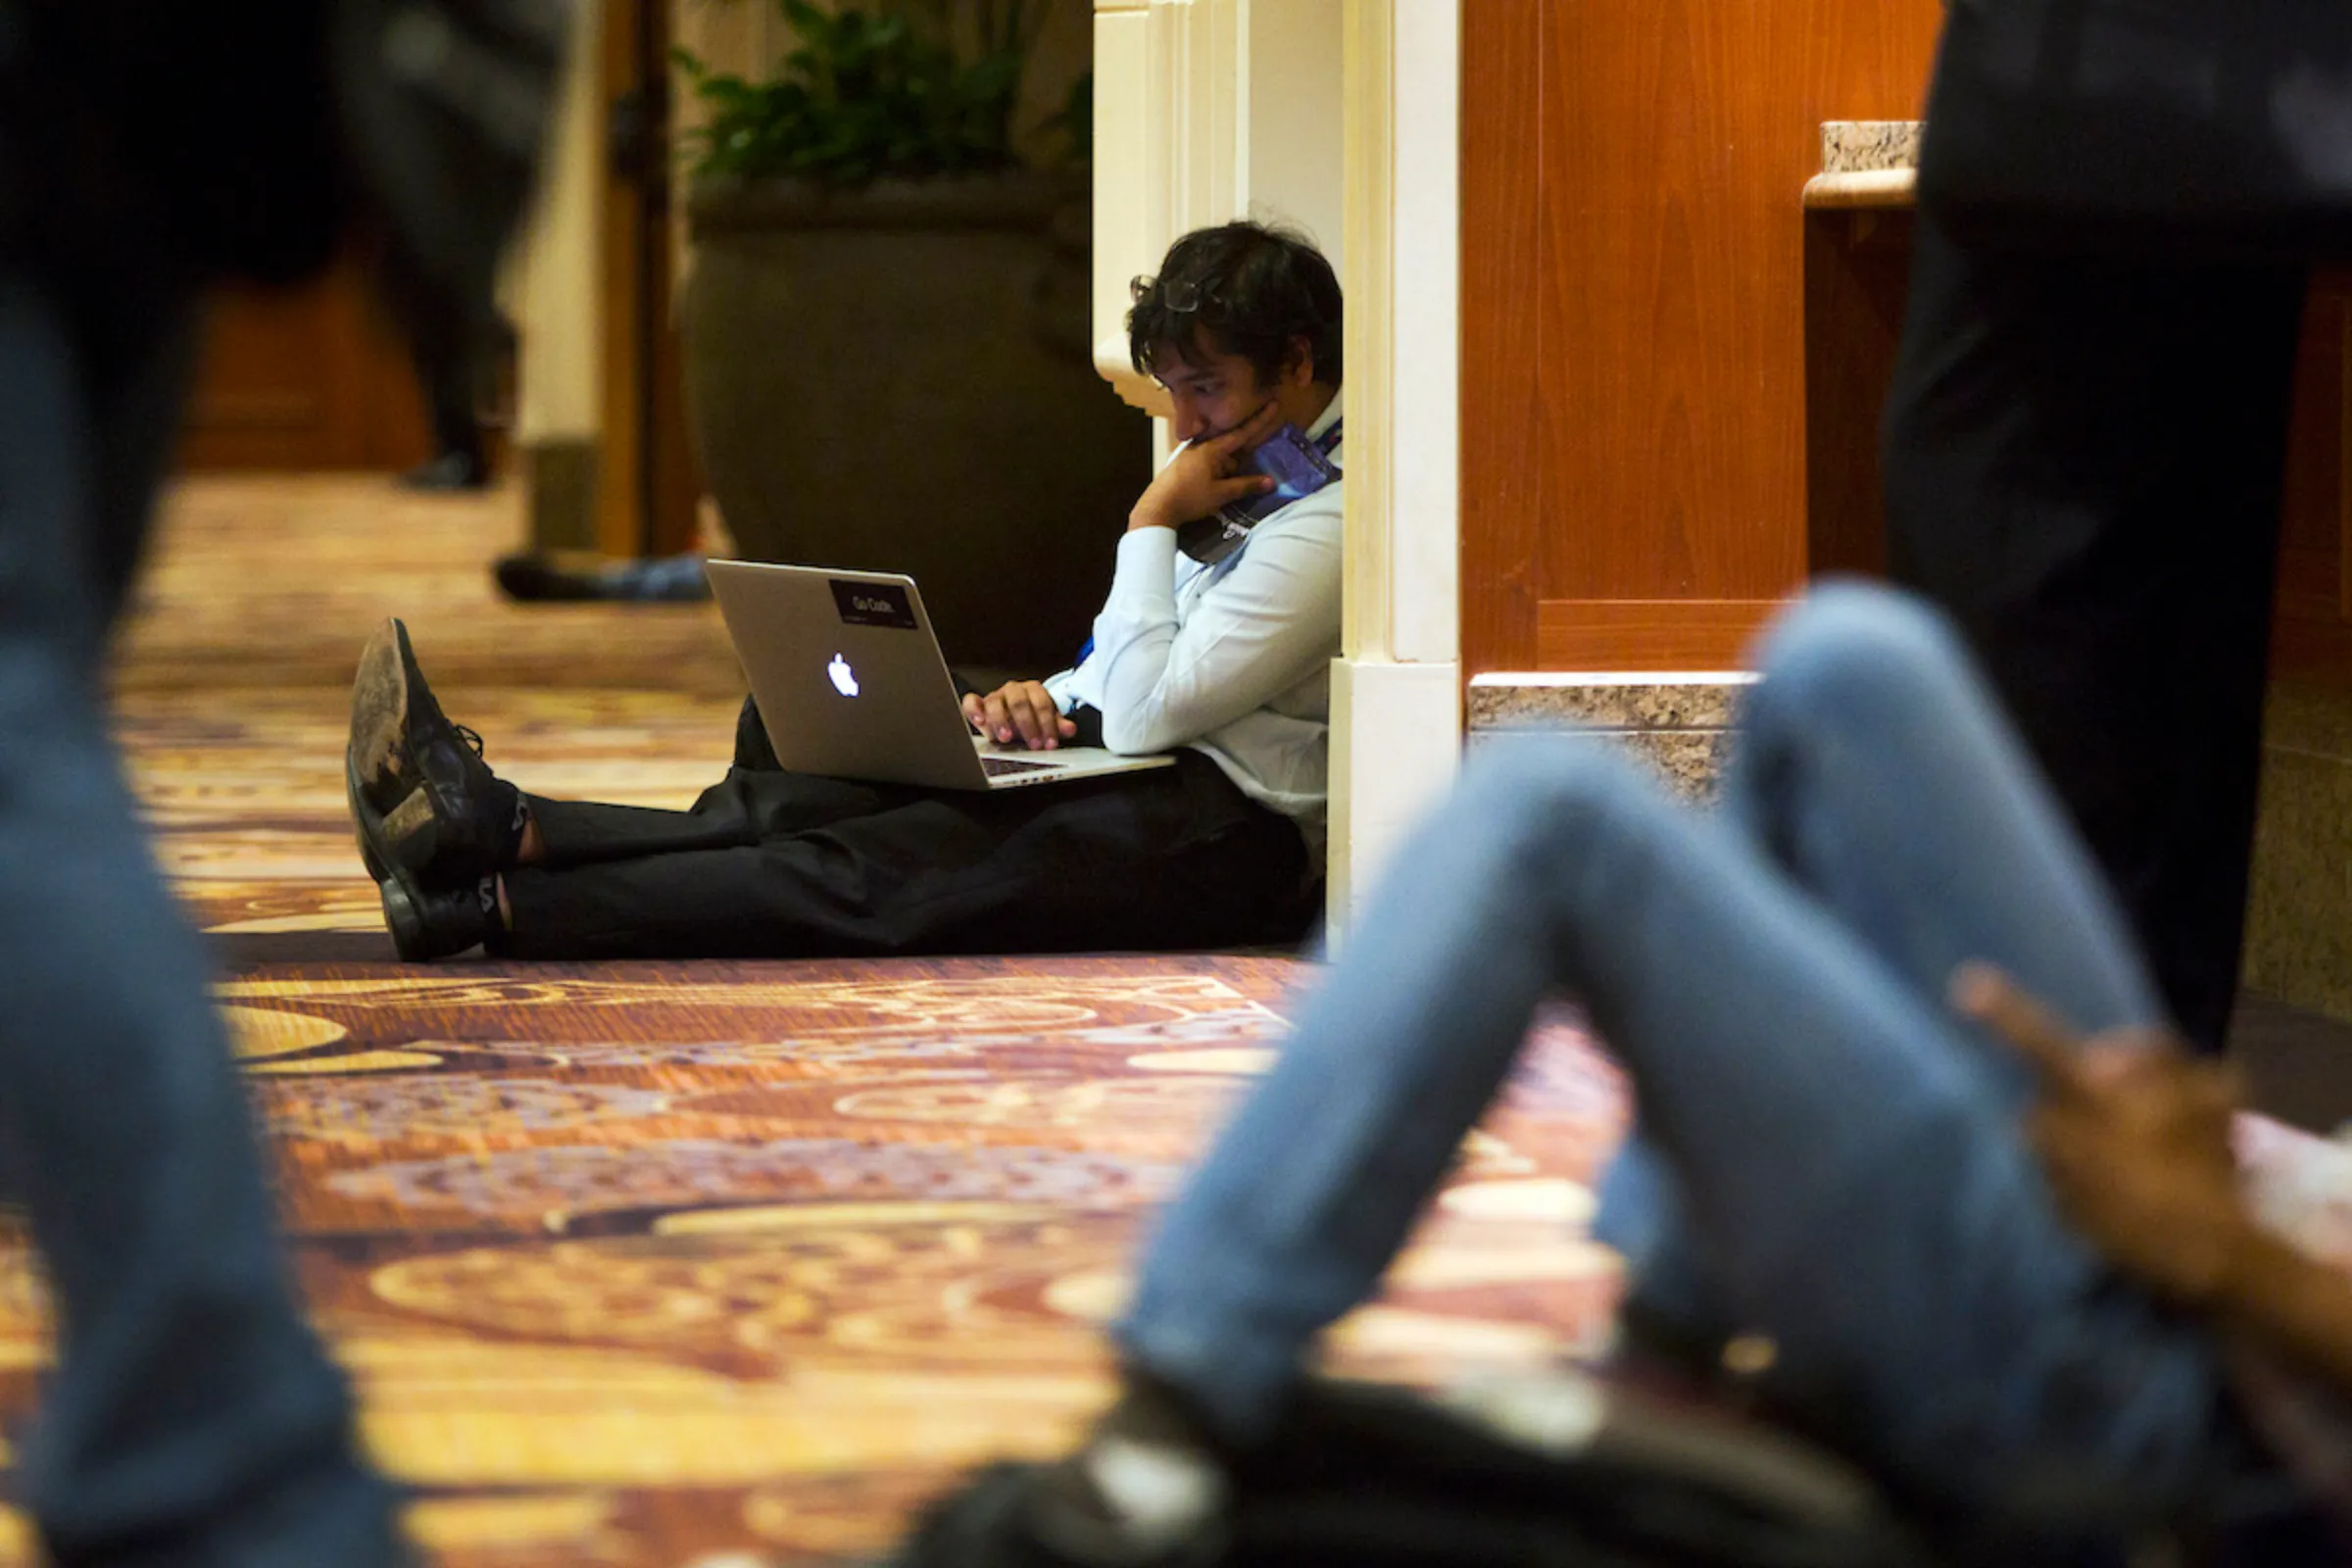 A security engineer at Google, works in a hallway during the Black Hat USA 2014 hacker conference at the Mandalay Bay Convention Center in Las Vegas, Nevada August 6, 2014. REUTERS/Steve Marcus